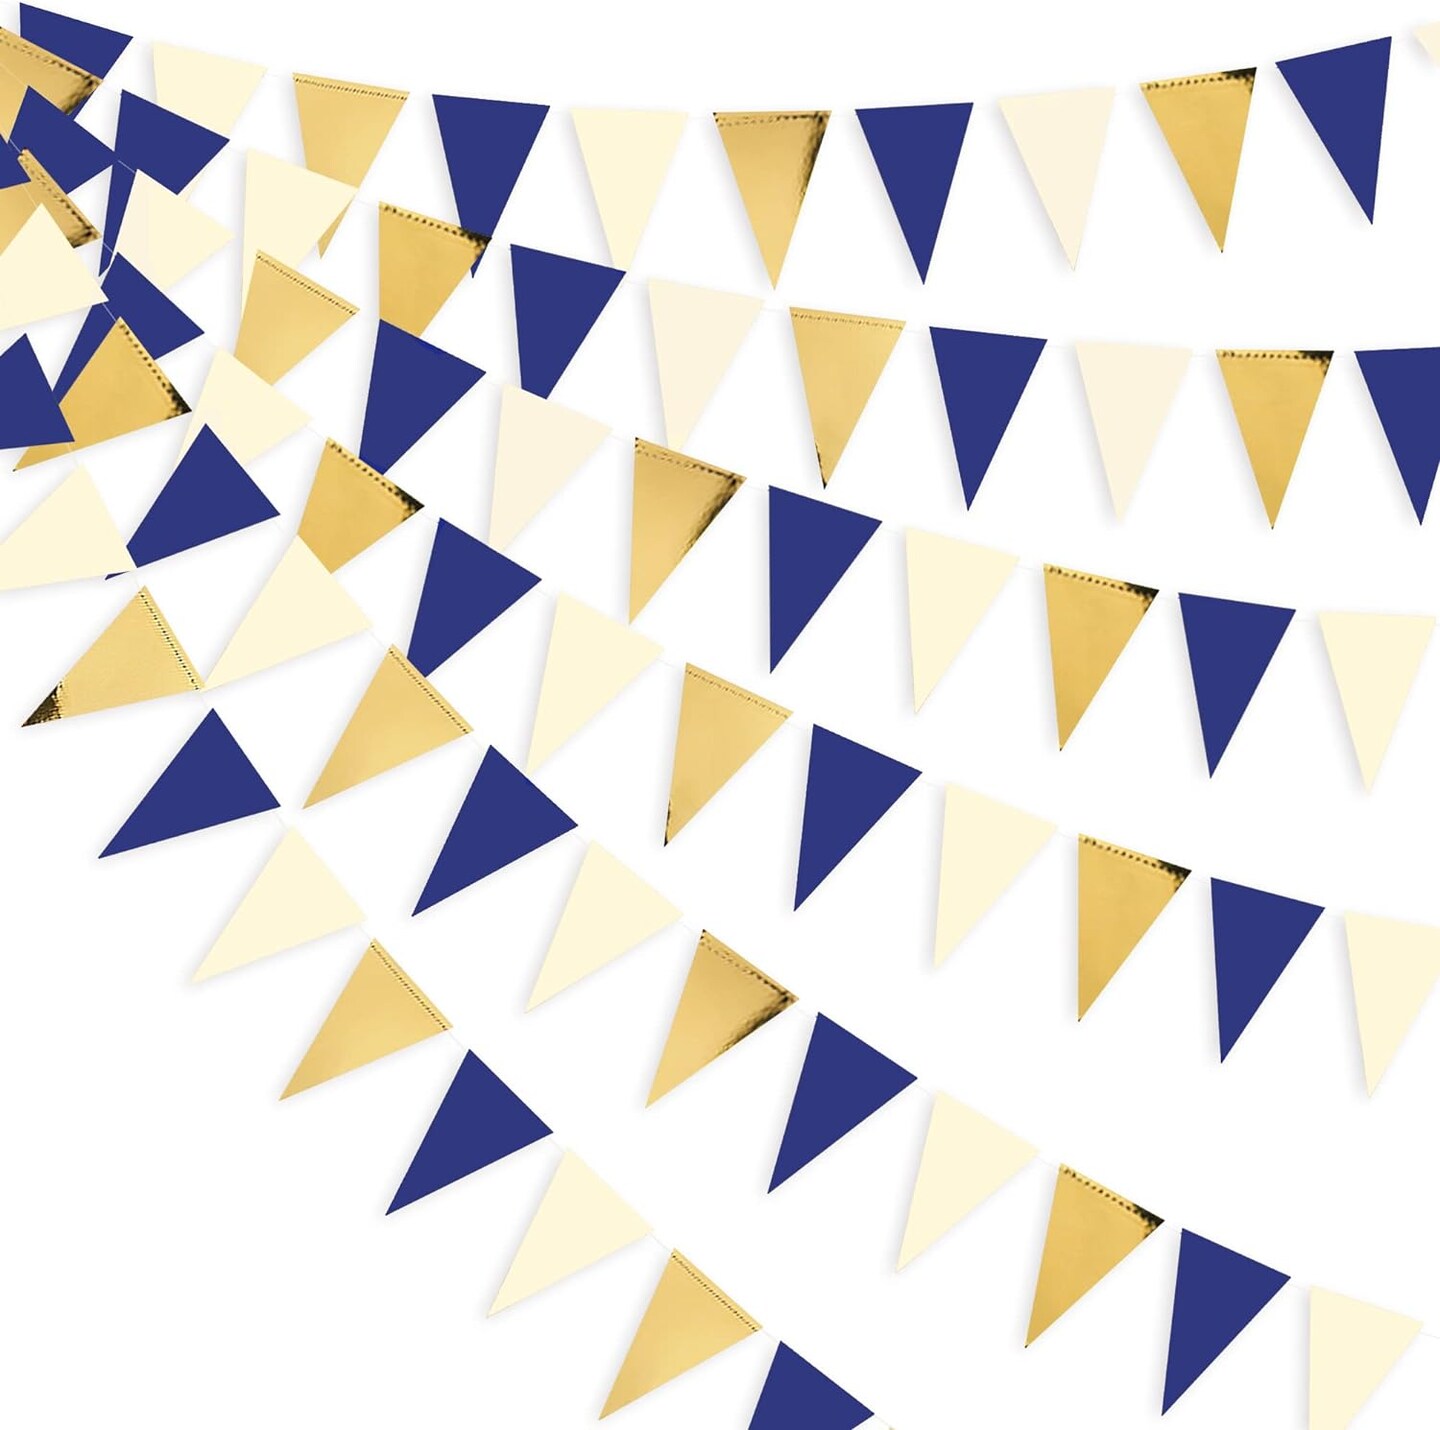 30Ft Navy Blue Gold and Beige Party Decorations Royal Blue Gold Triangle Flag Pennant Banner Bunting for Graduation Birthday Wedding Bridal Shower Nautical Ahoy Achor Theme Party Decorations Supplies